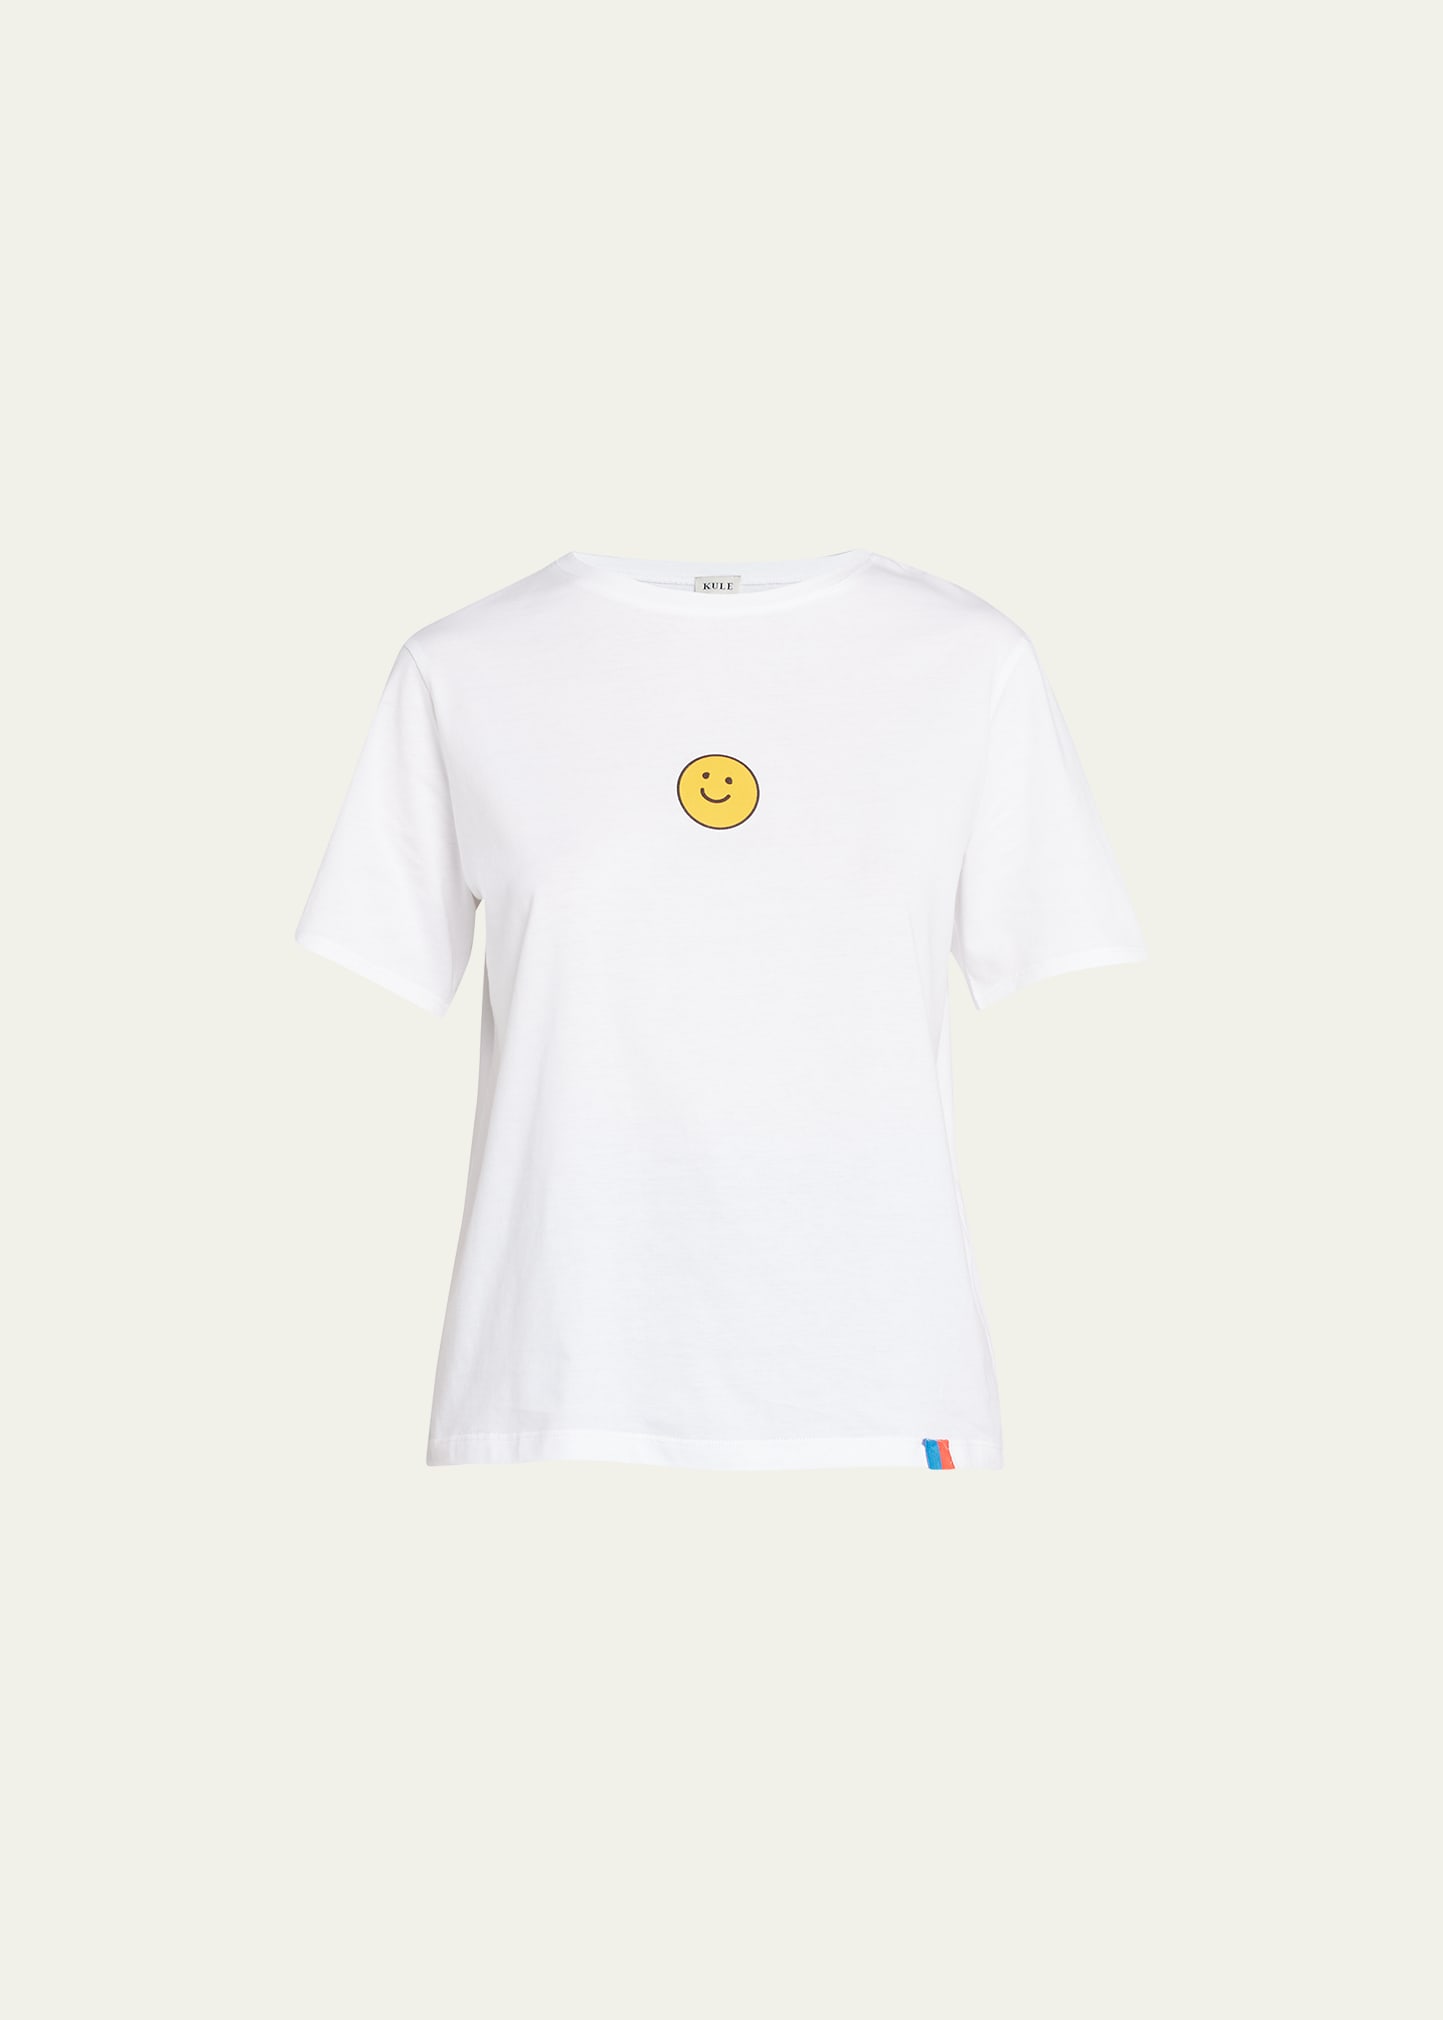 The Modern Smile Graphic T-Shirt